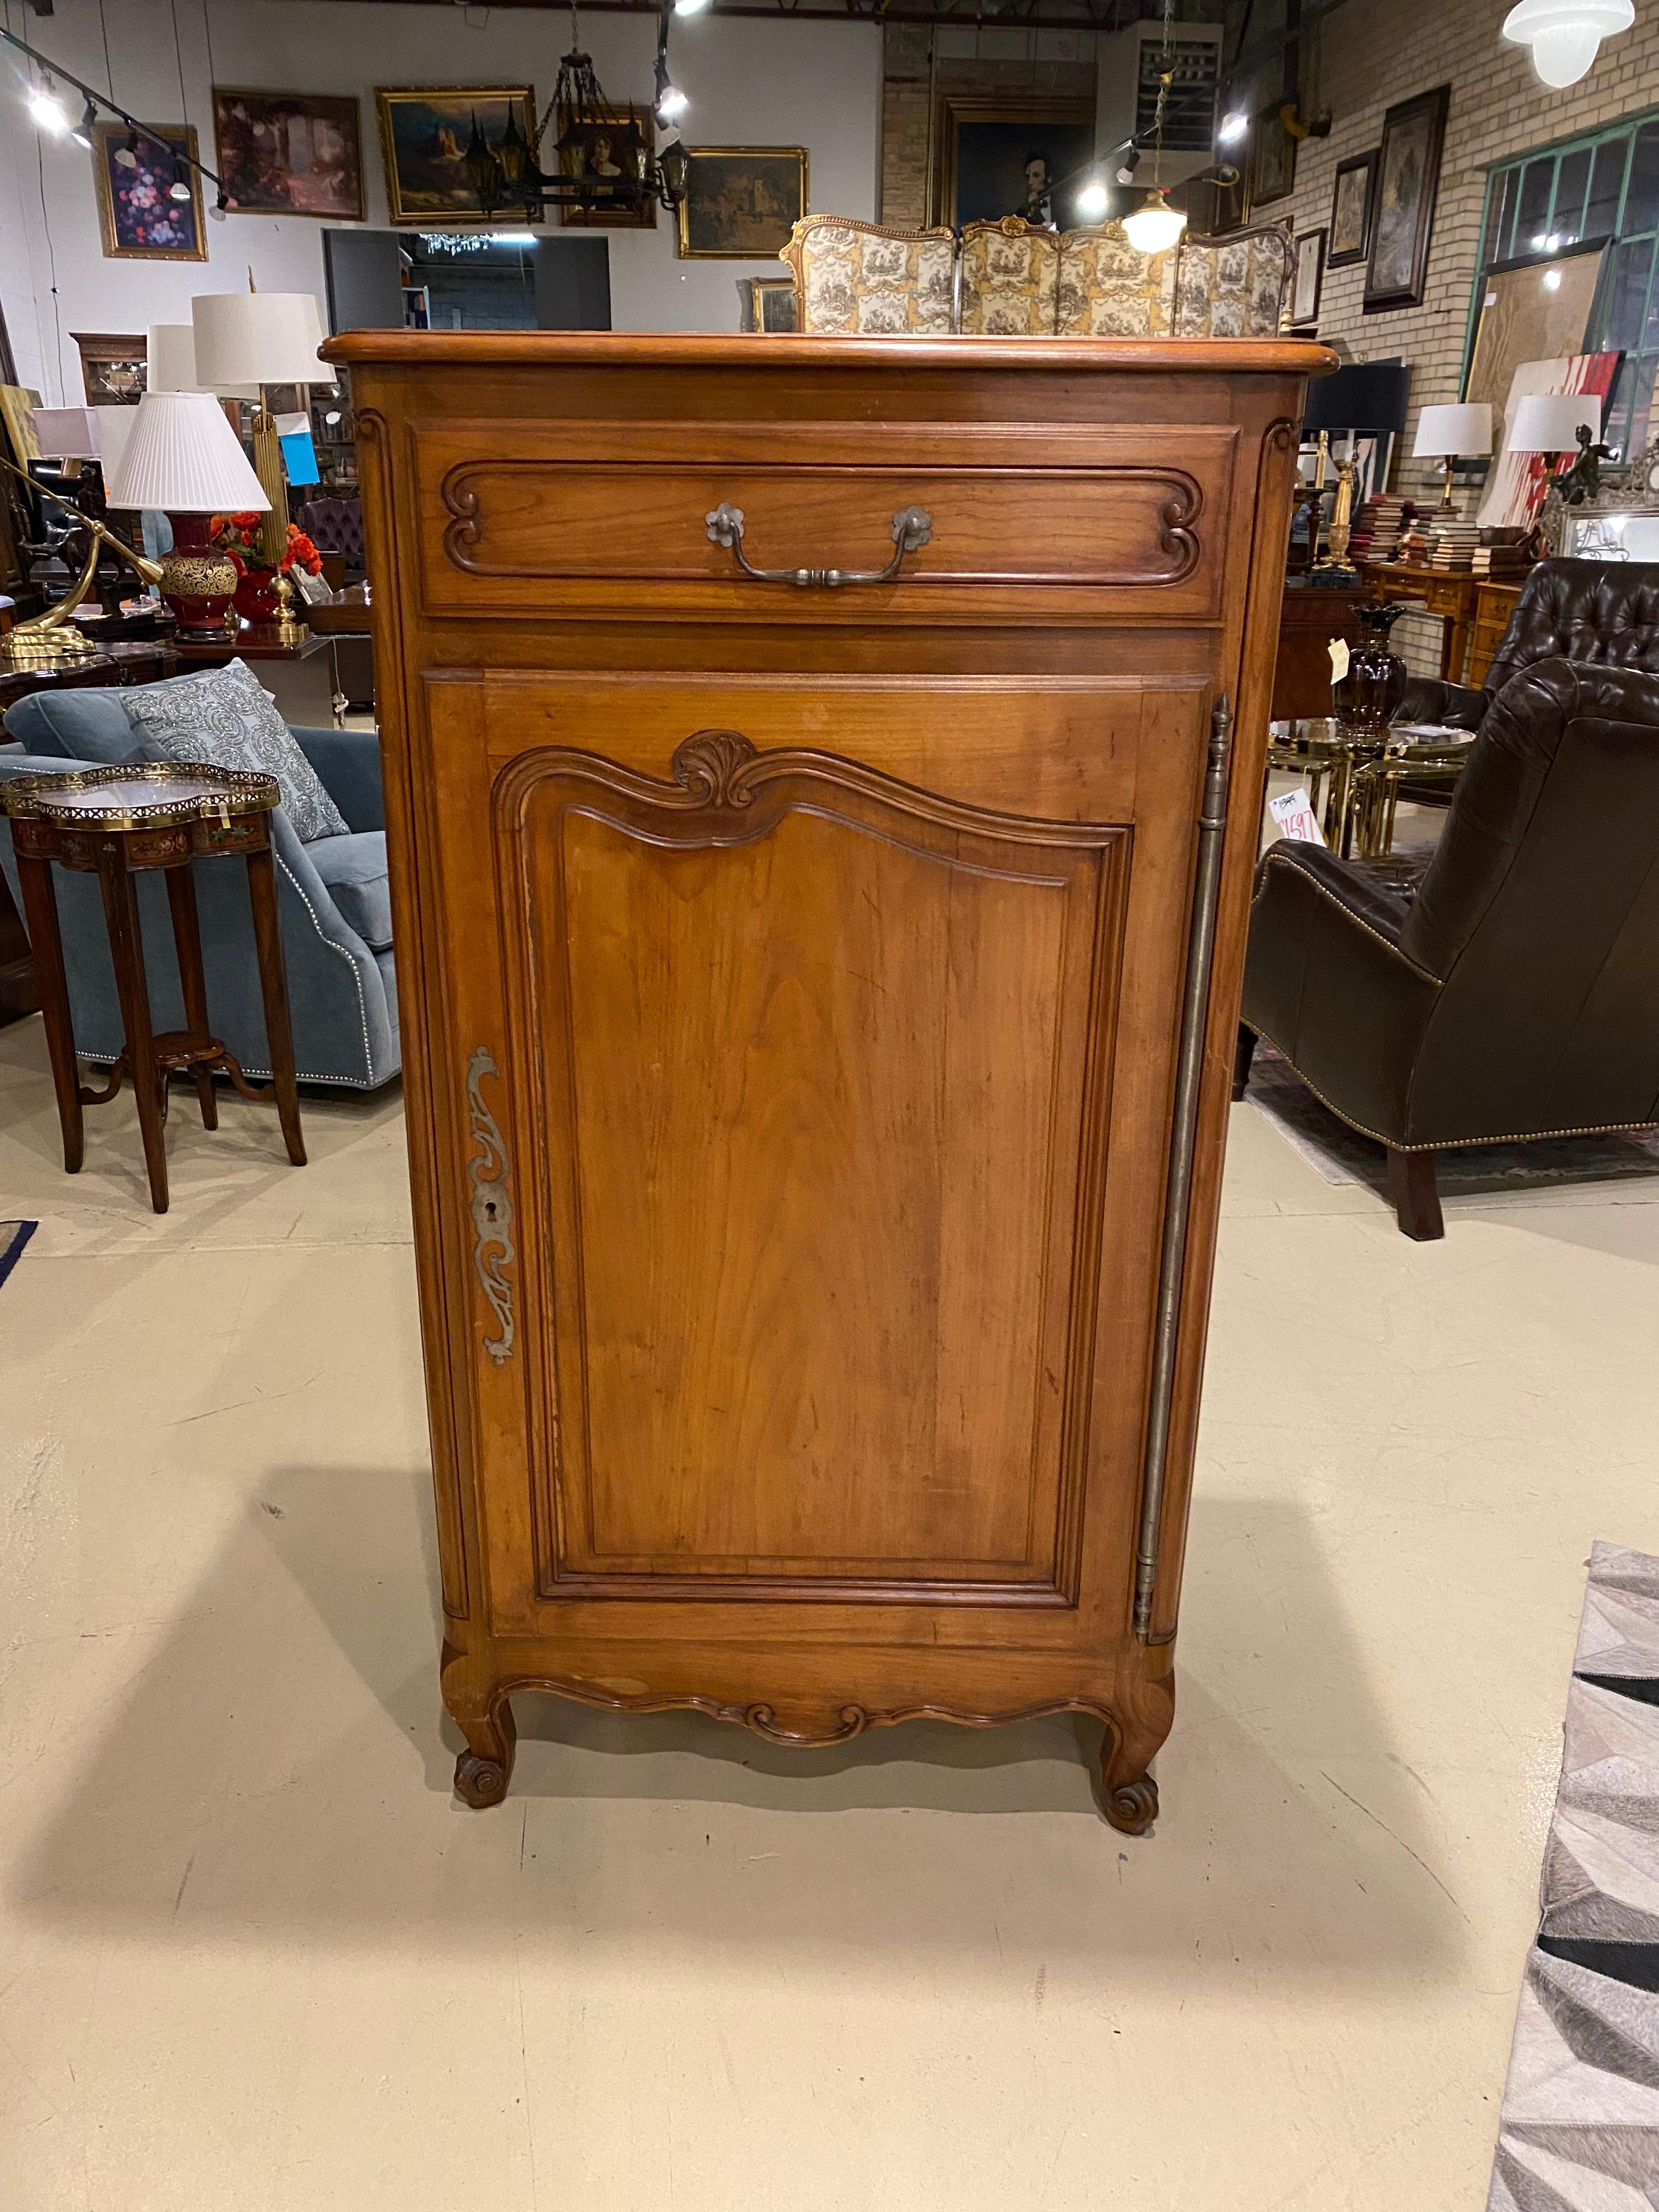 A French Country style cherry jam cupboard. This piece has a lot of storage without a big footprint in the room, but adds a bit of tradition. There is a single drawer above the door and another behind the door.